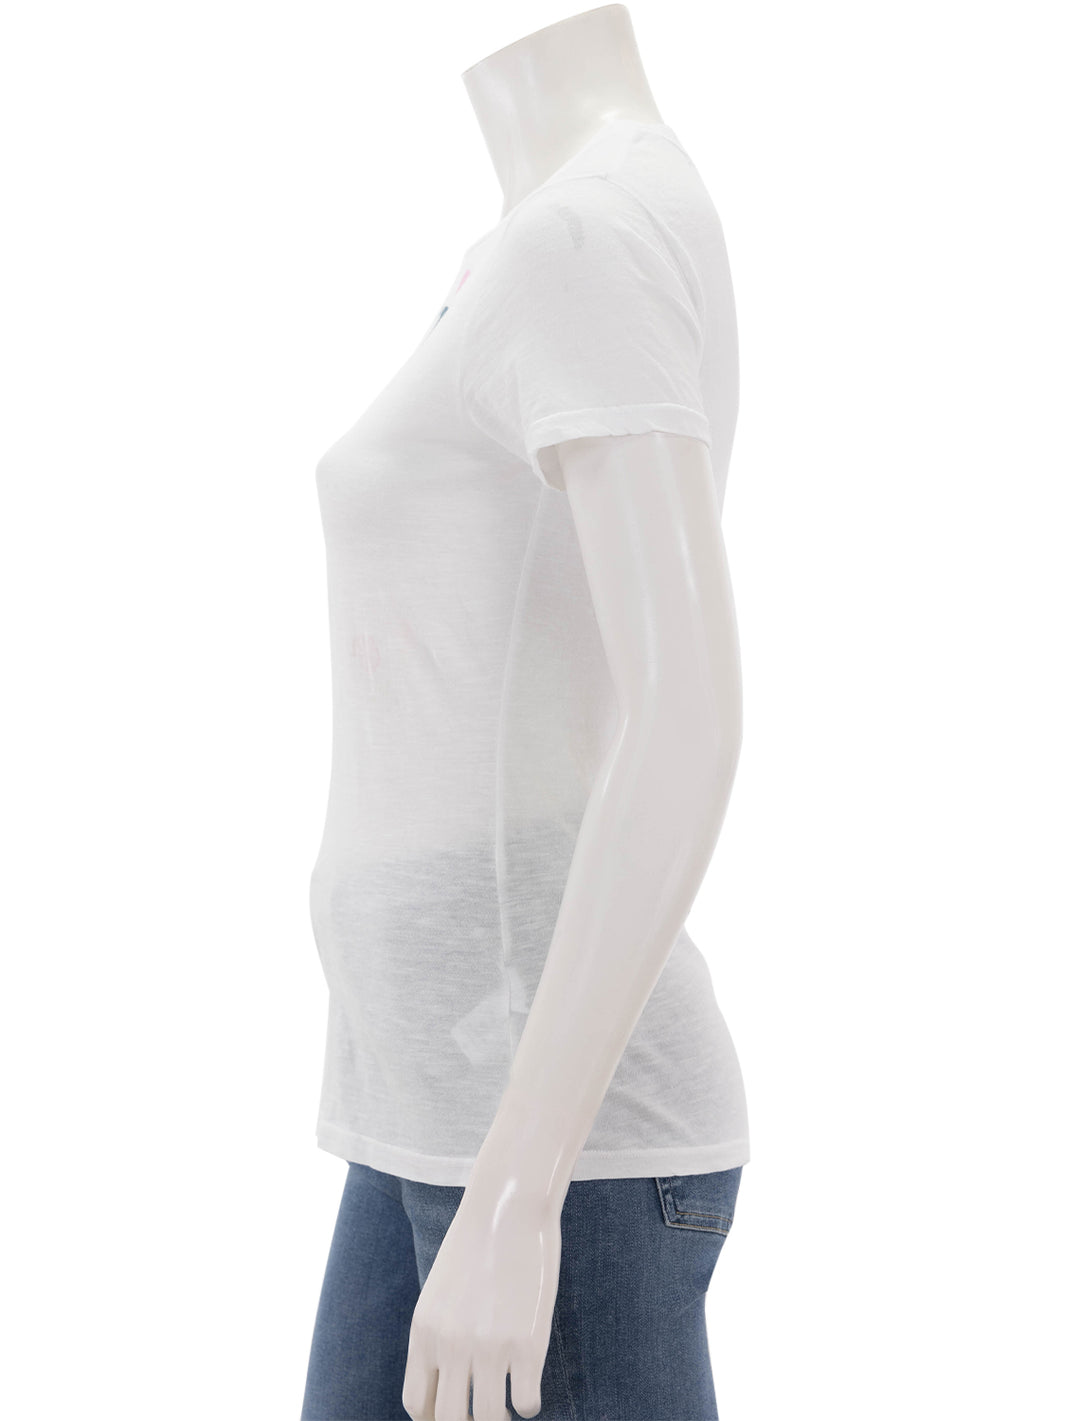 Side view of Sundry's oui tee in white.